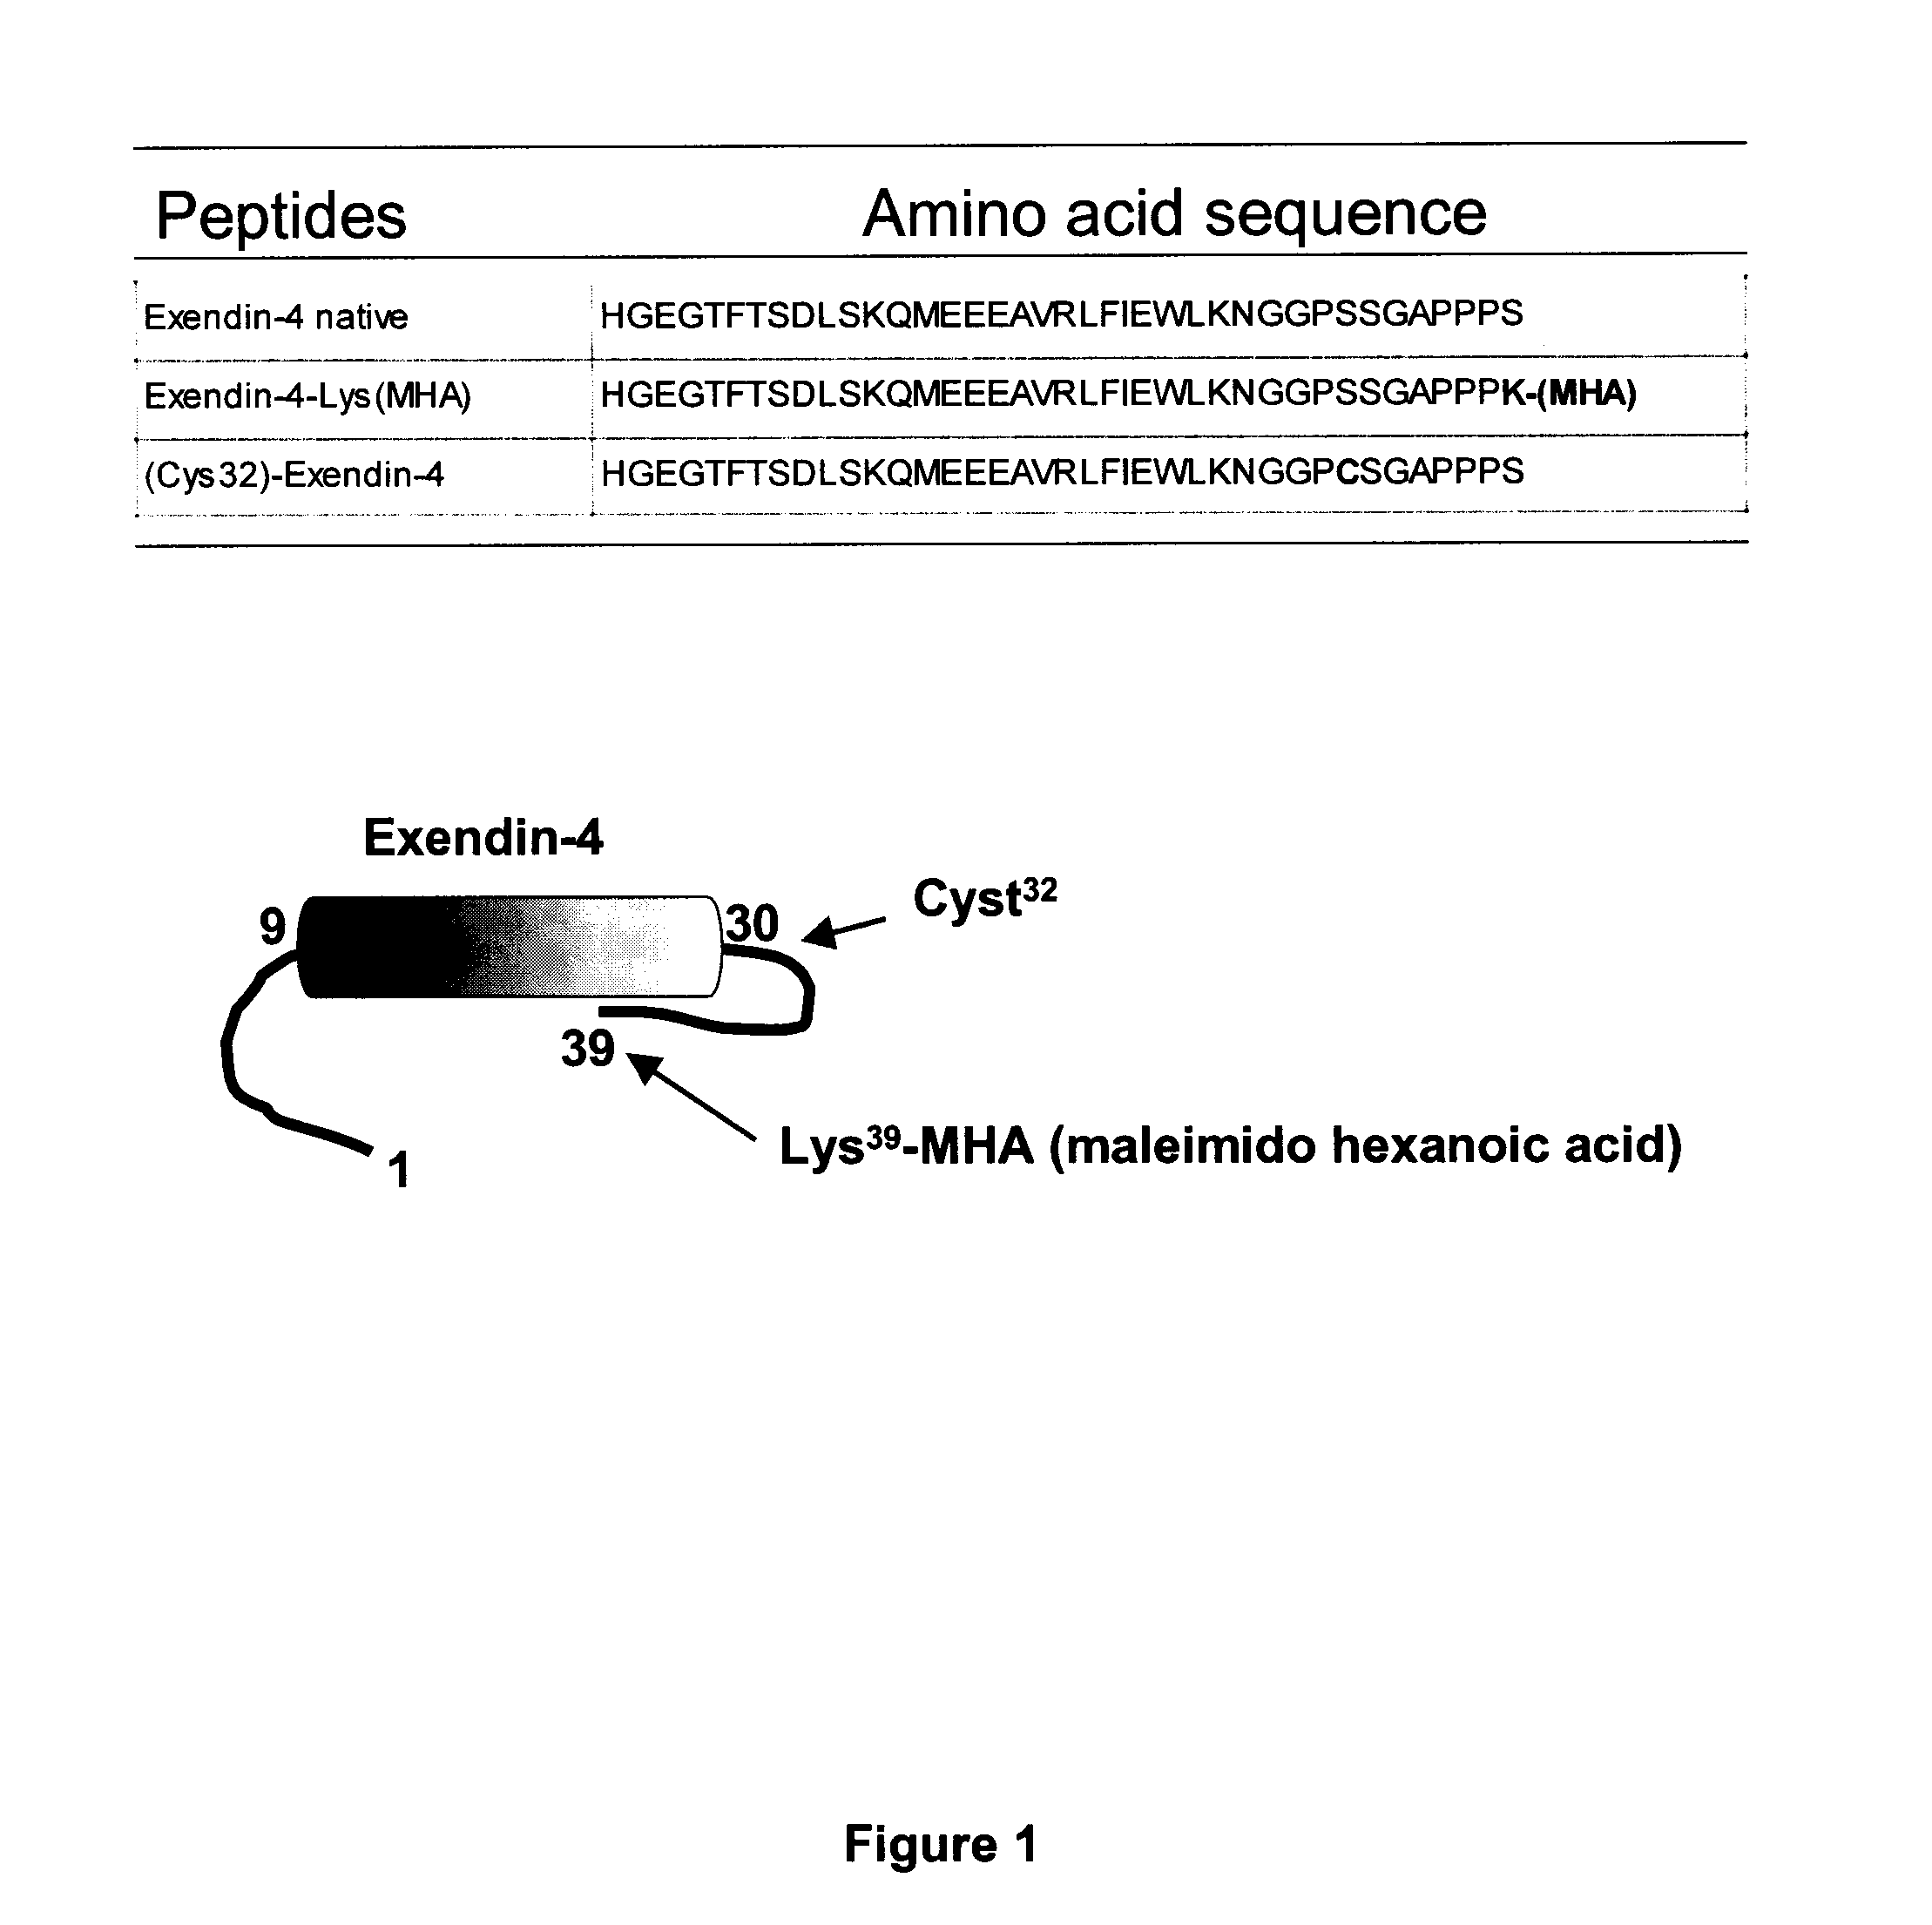 Conjugates of glp-1 agonists and uses thereof